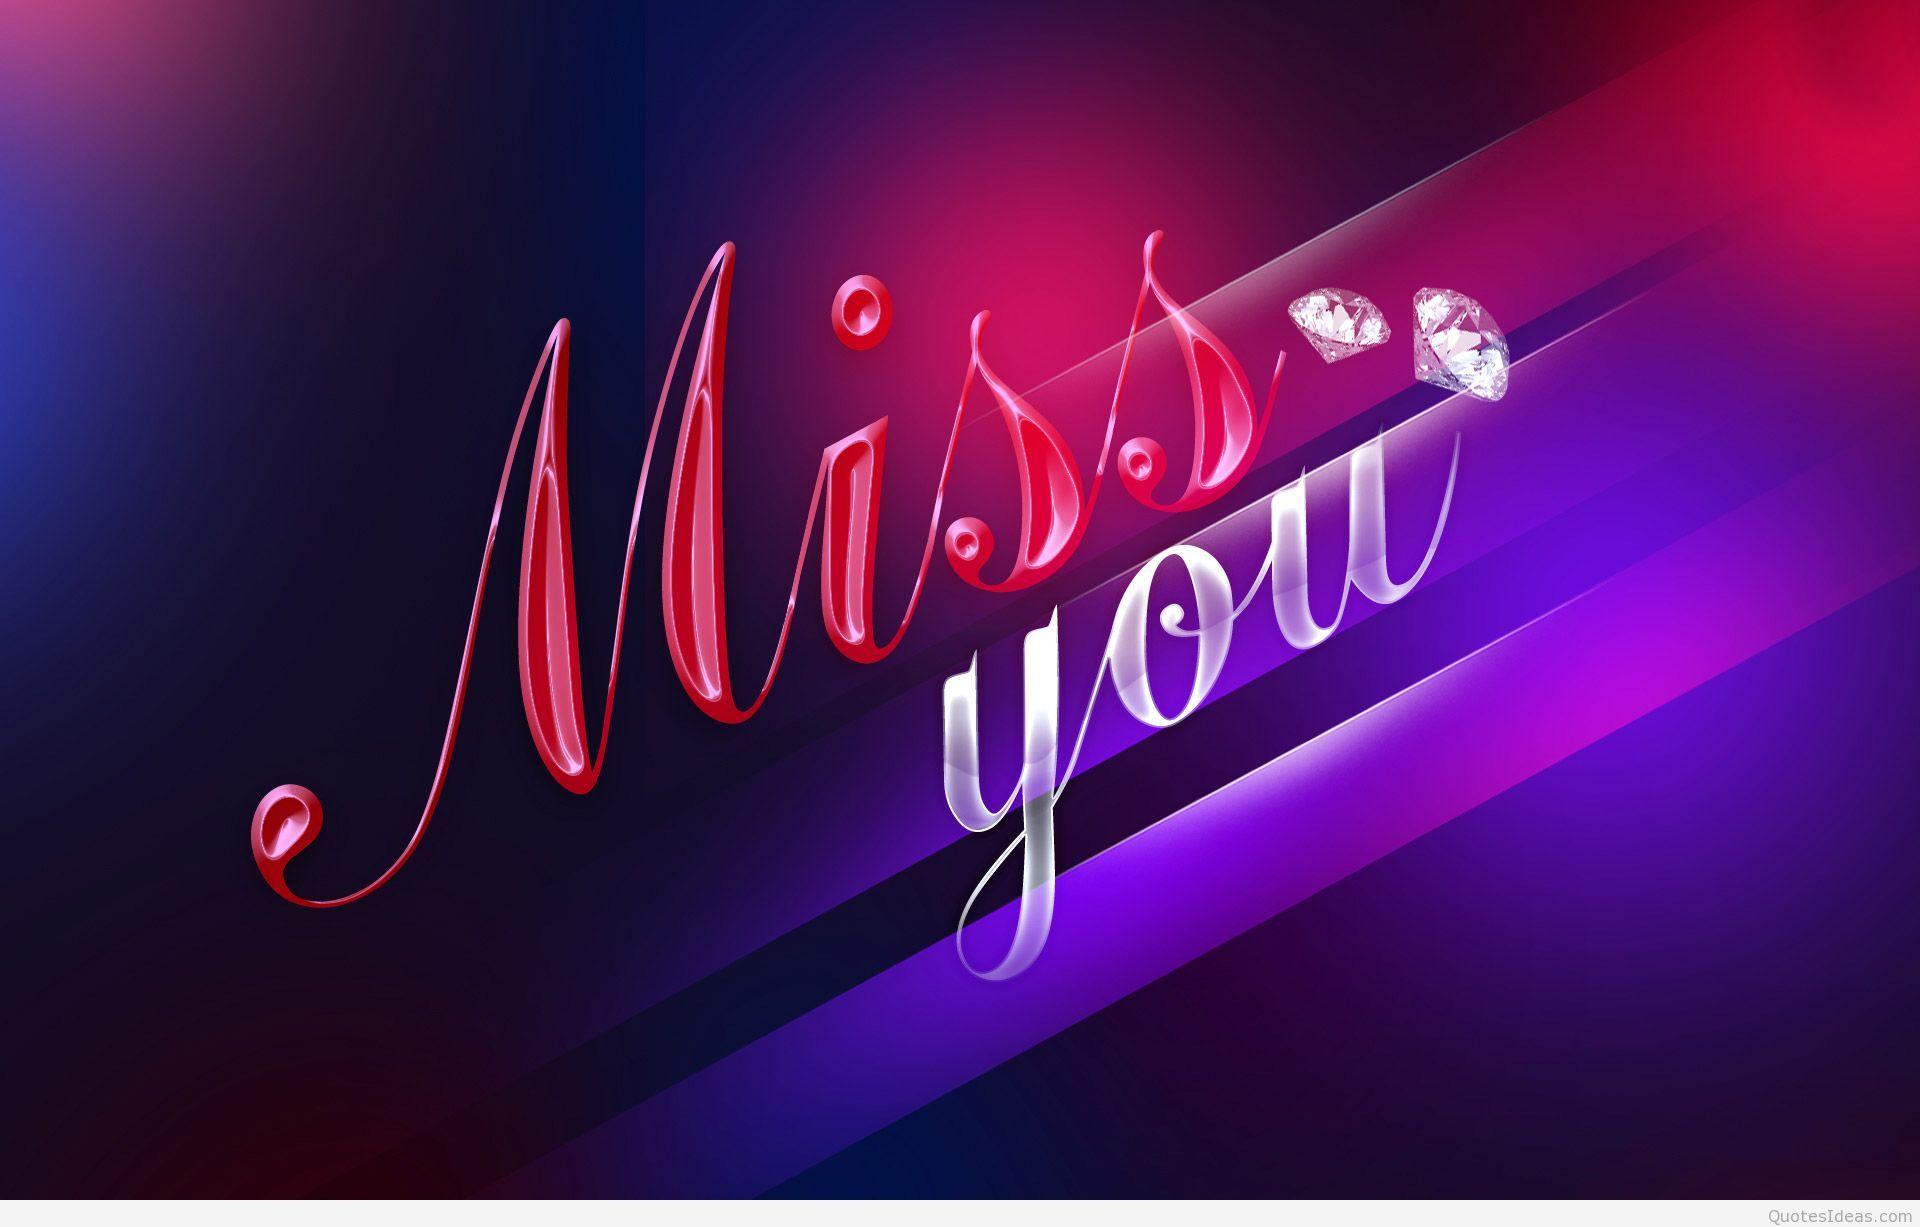 562 We Will Miss You Images Stock Photos  Vectors  Shutterstock